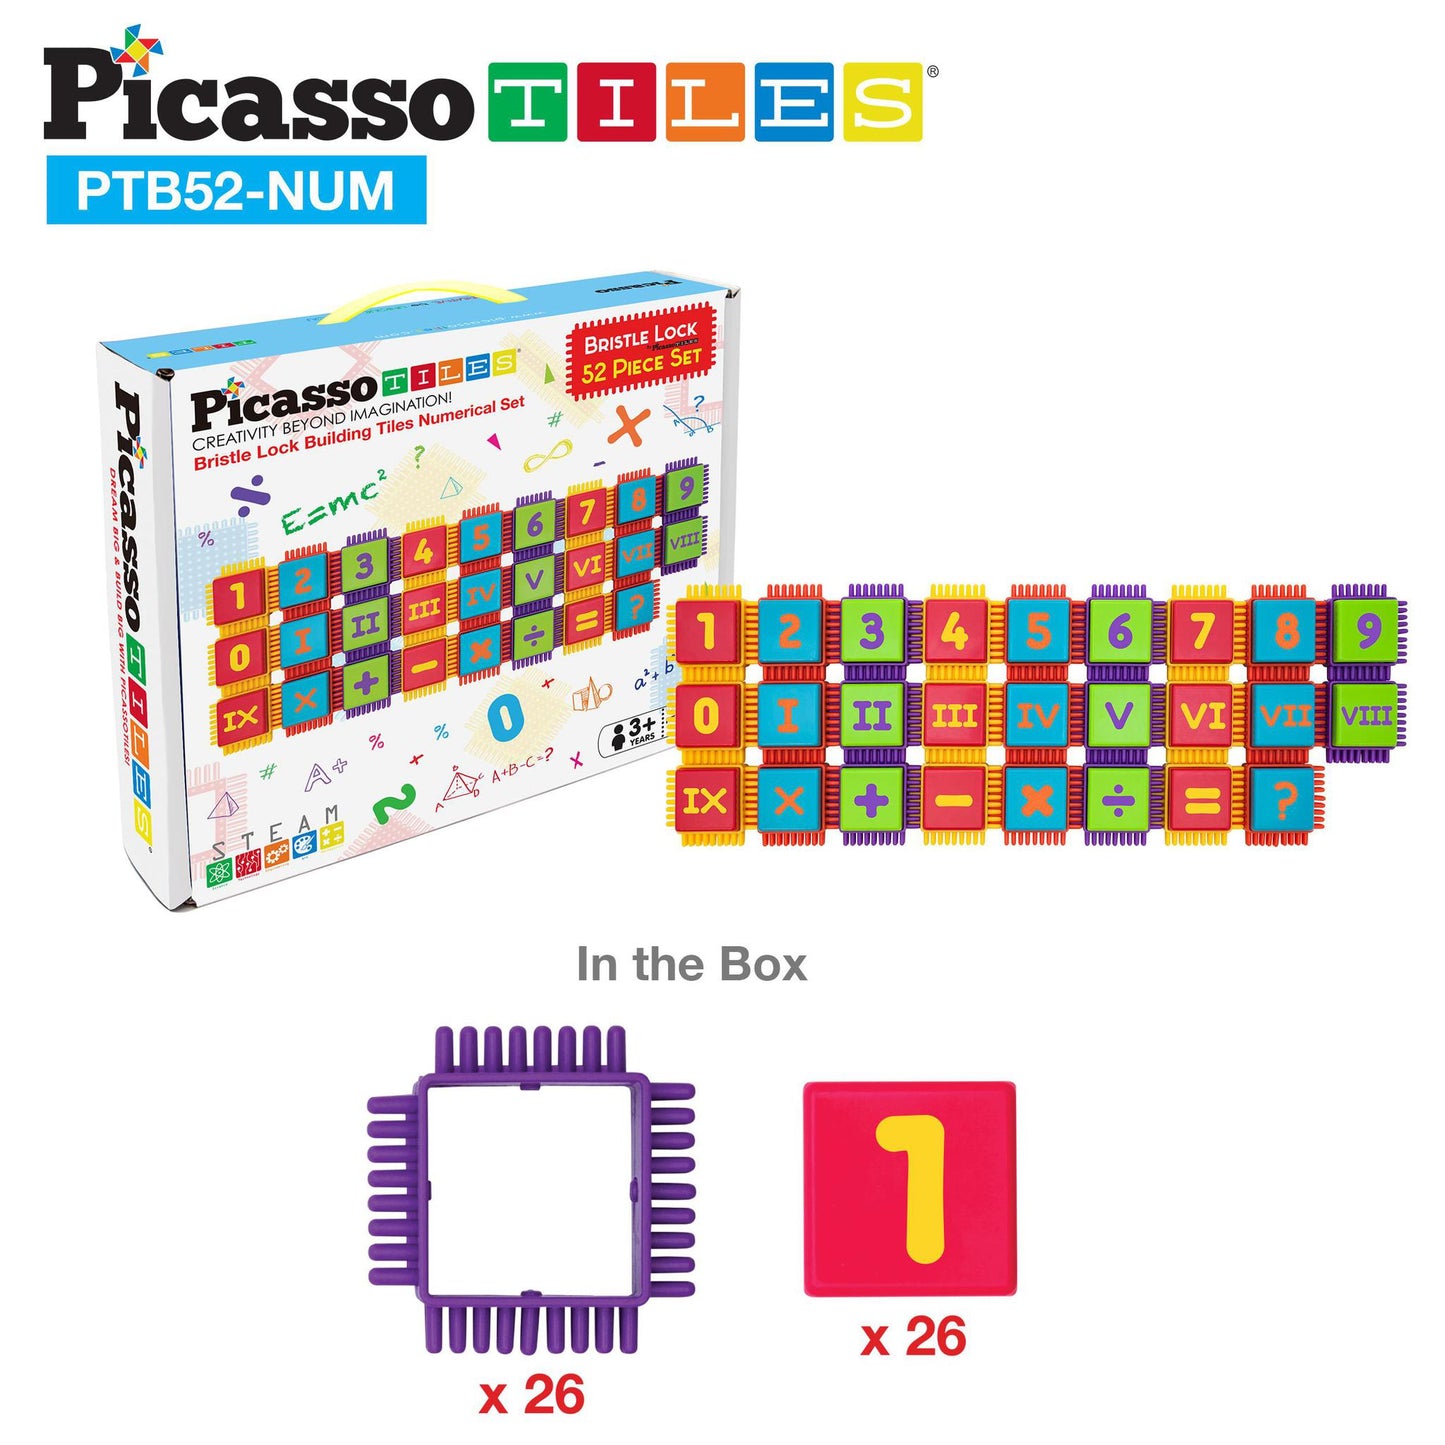 PicassoTiles Bristle Shape Blocks 52pc Numerical Building Tiles Set Construction Learning Toy Stacking Educational Block